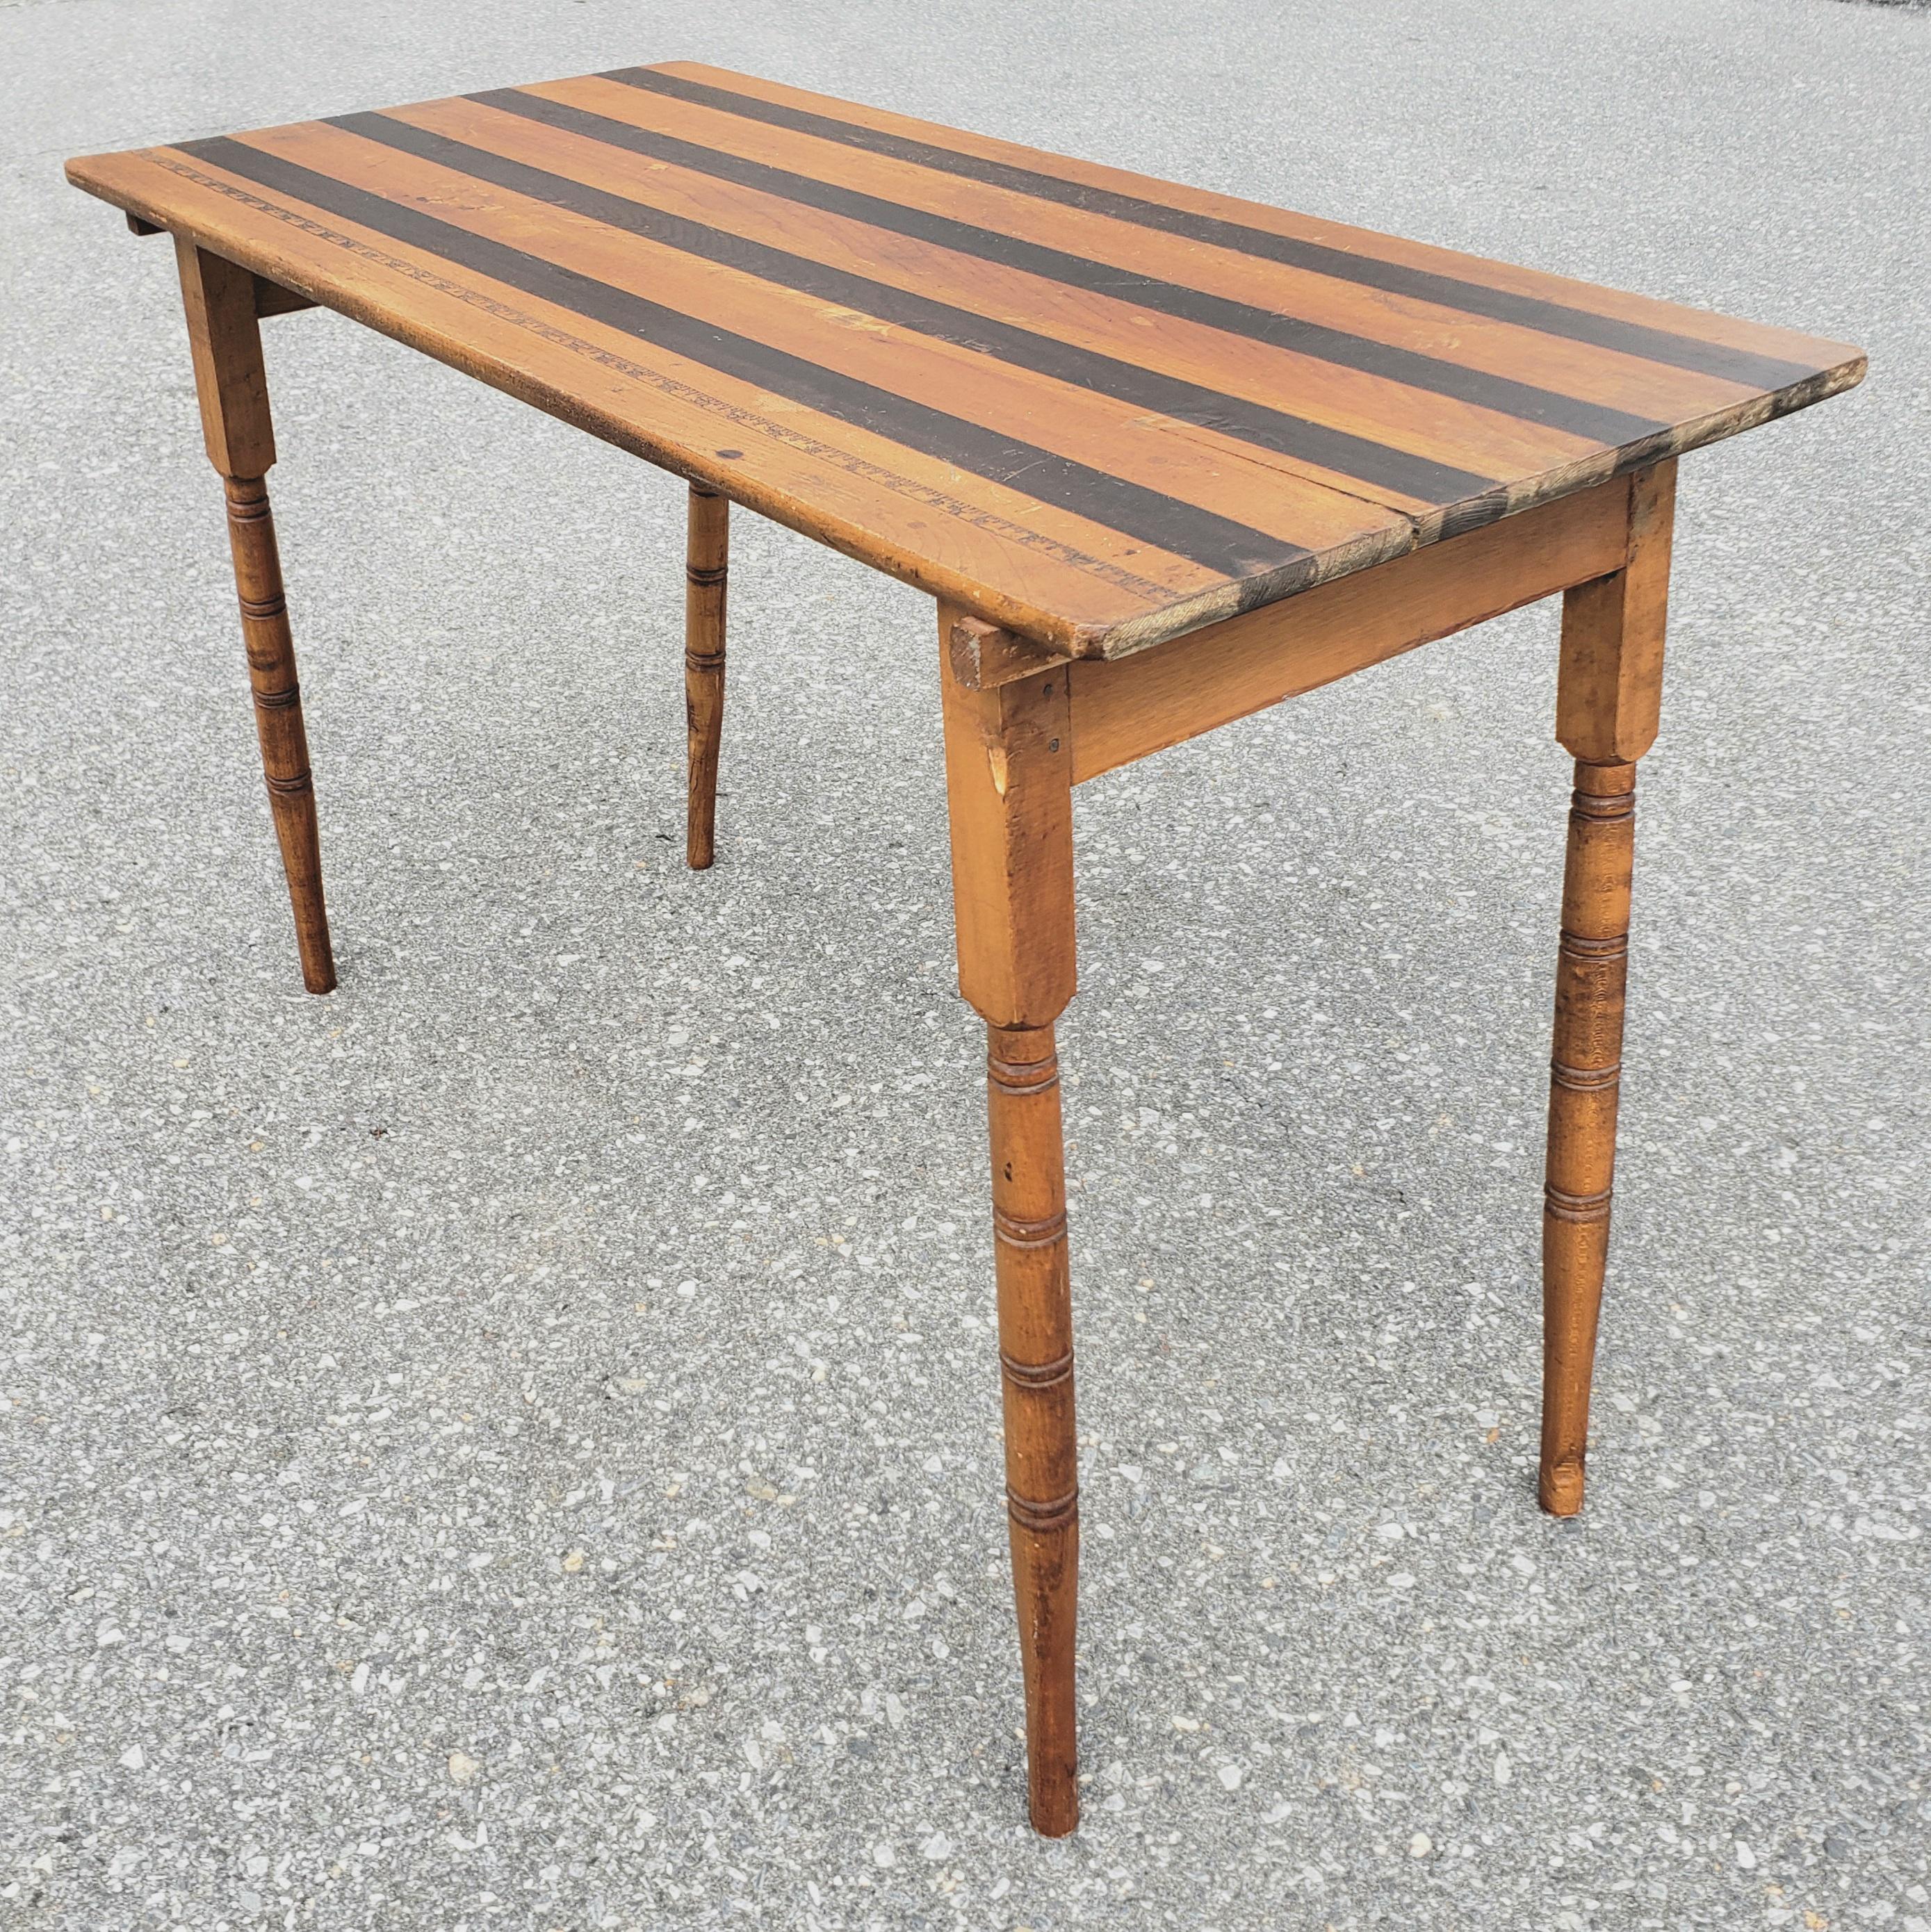 Rare antique collapsable wood industrial work table with ruler in very good antique condition. Great antique industrial table. Perfect for a kitchen - work table- decor - bourbon bar and whatever you can dream up.